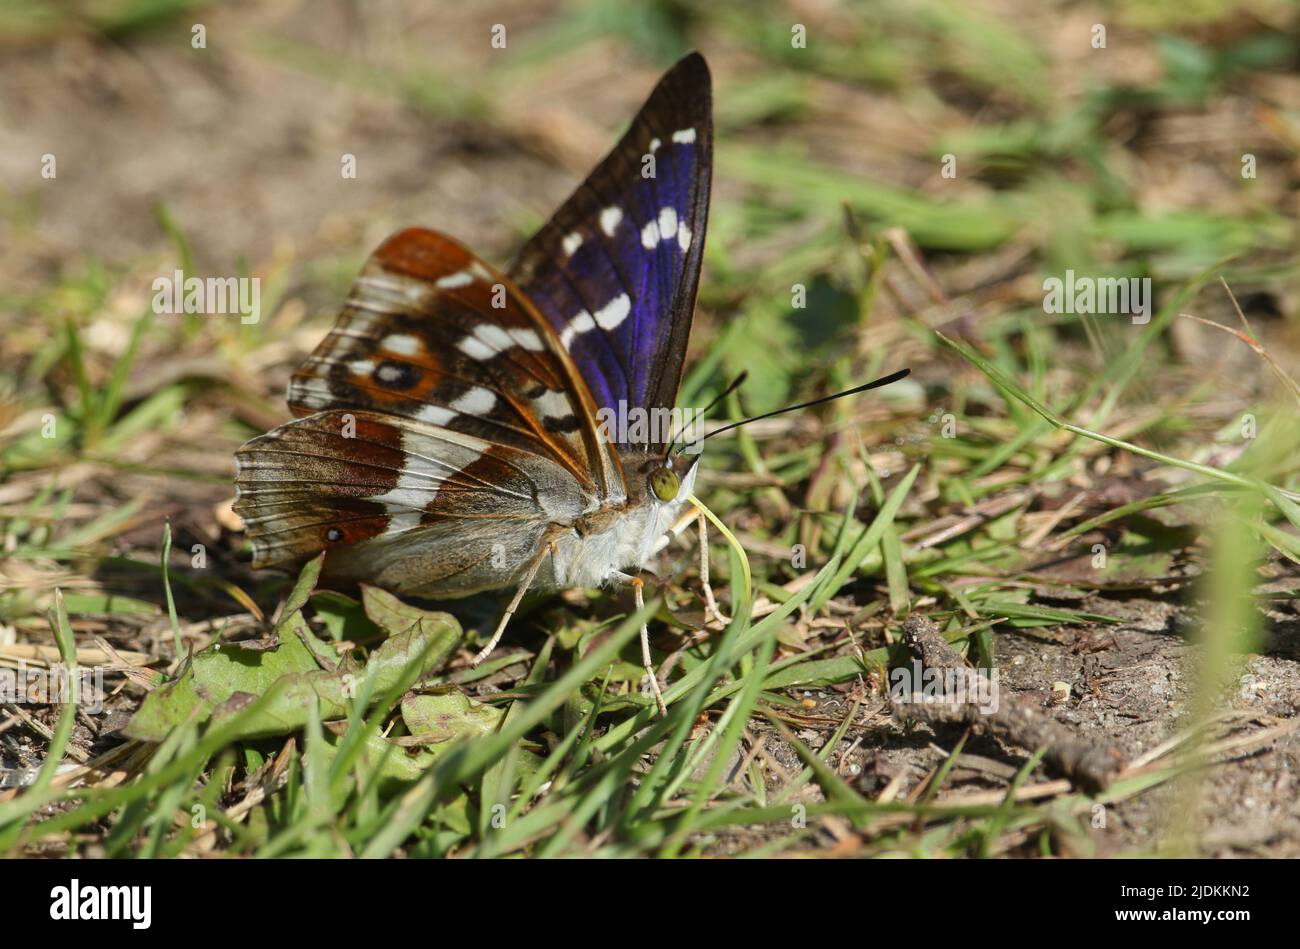 A rare male Purple Emperor Butterfly, Apatura iris, feeding on minerals on the ground in woodland. Stock Photo